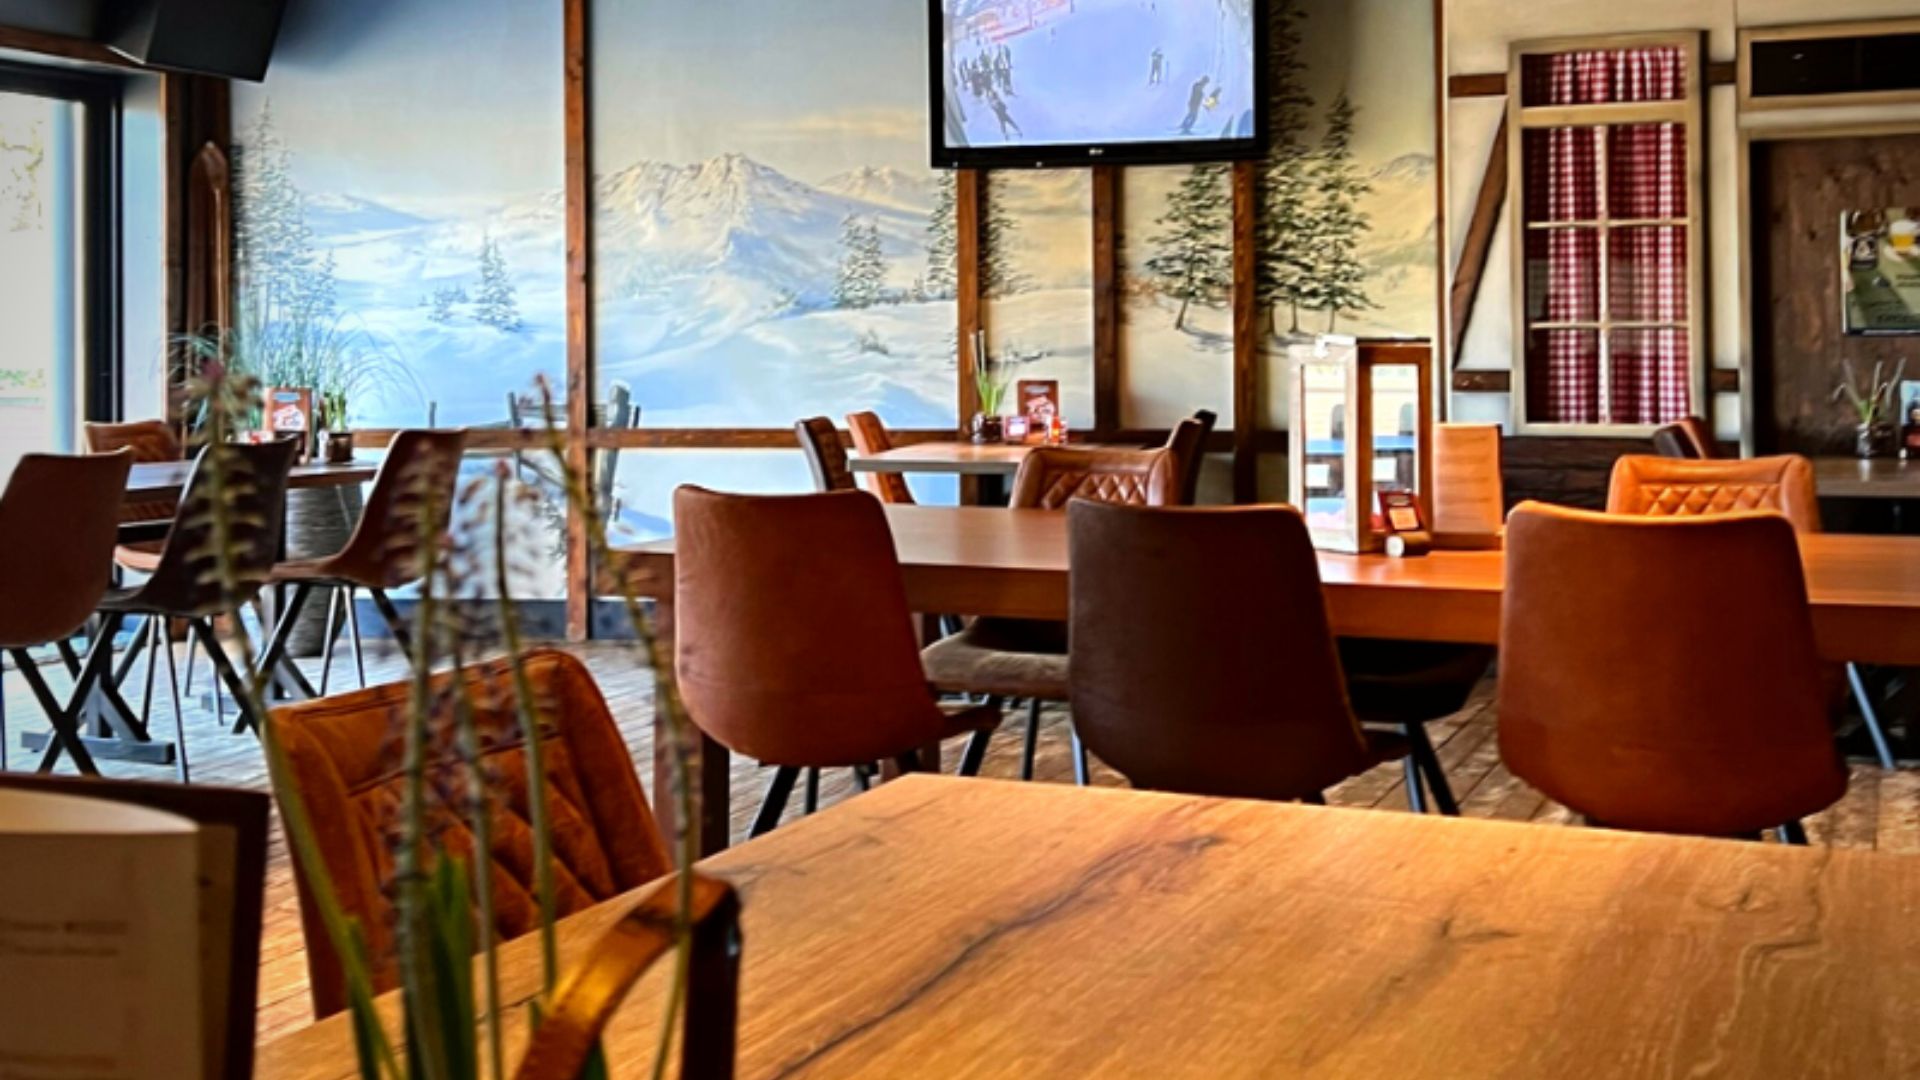 Restaurant at Montana Snowcenter overlooking the slopes